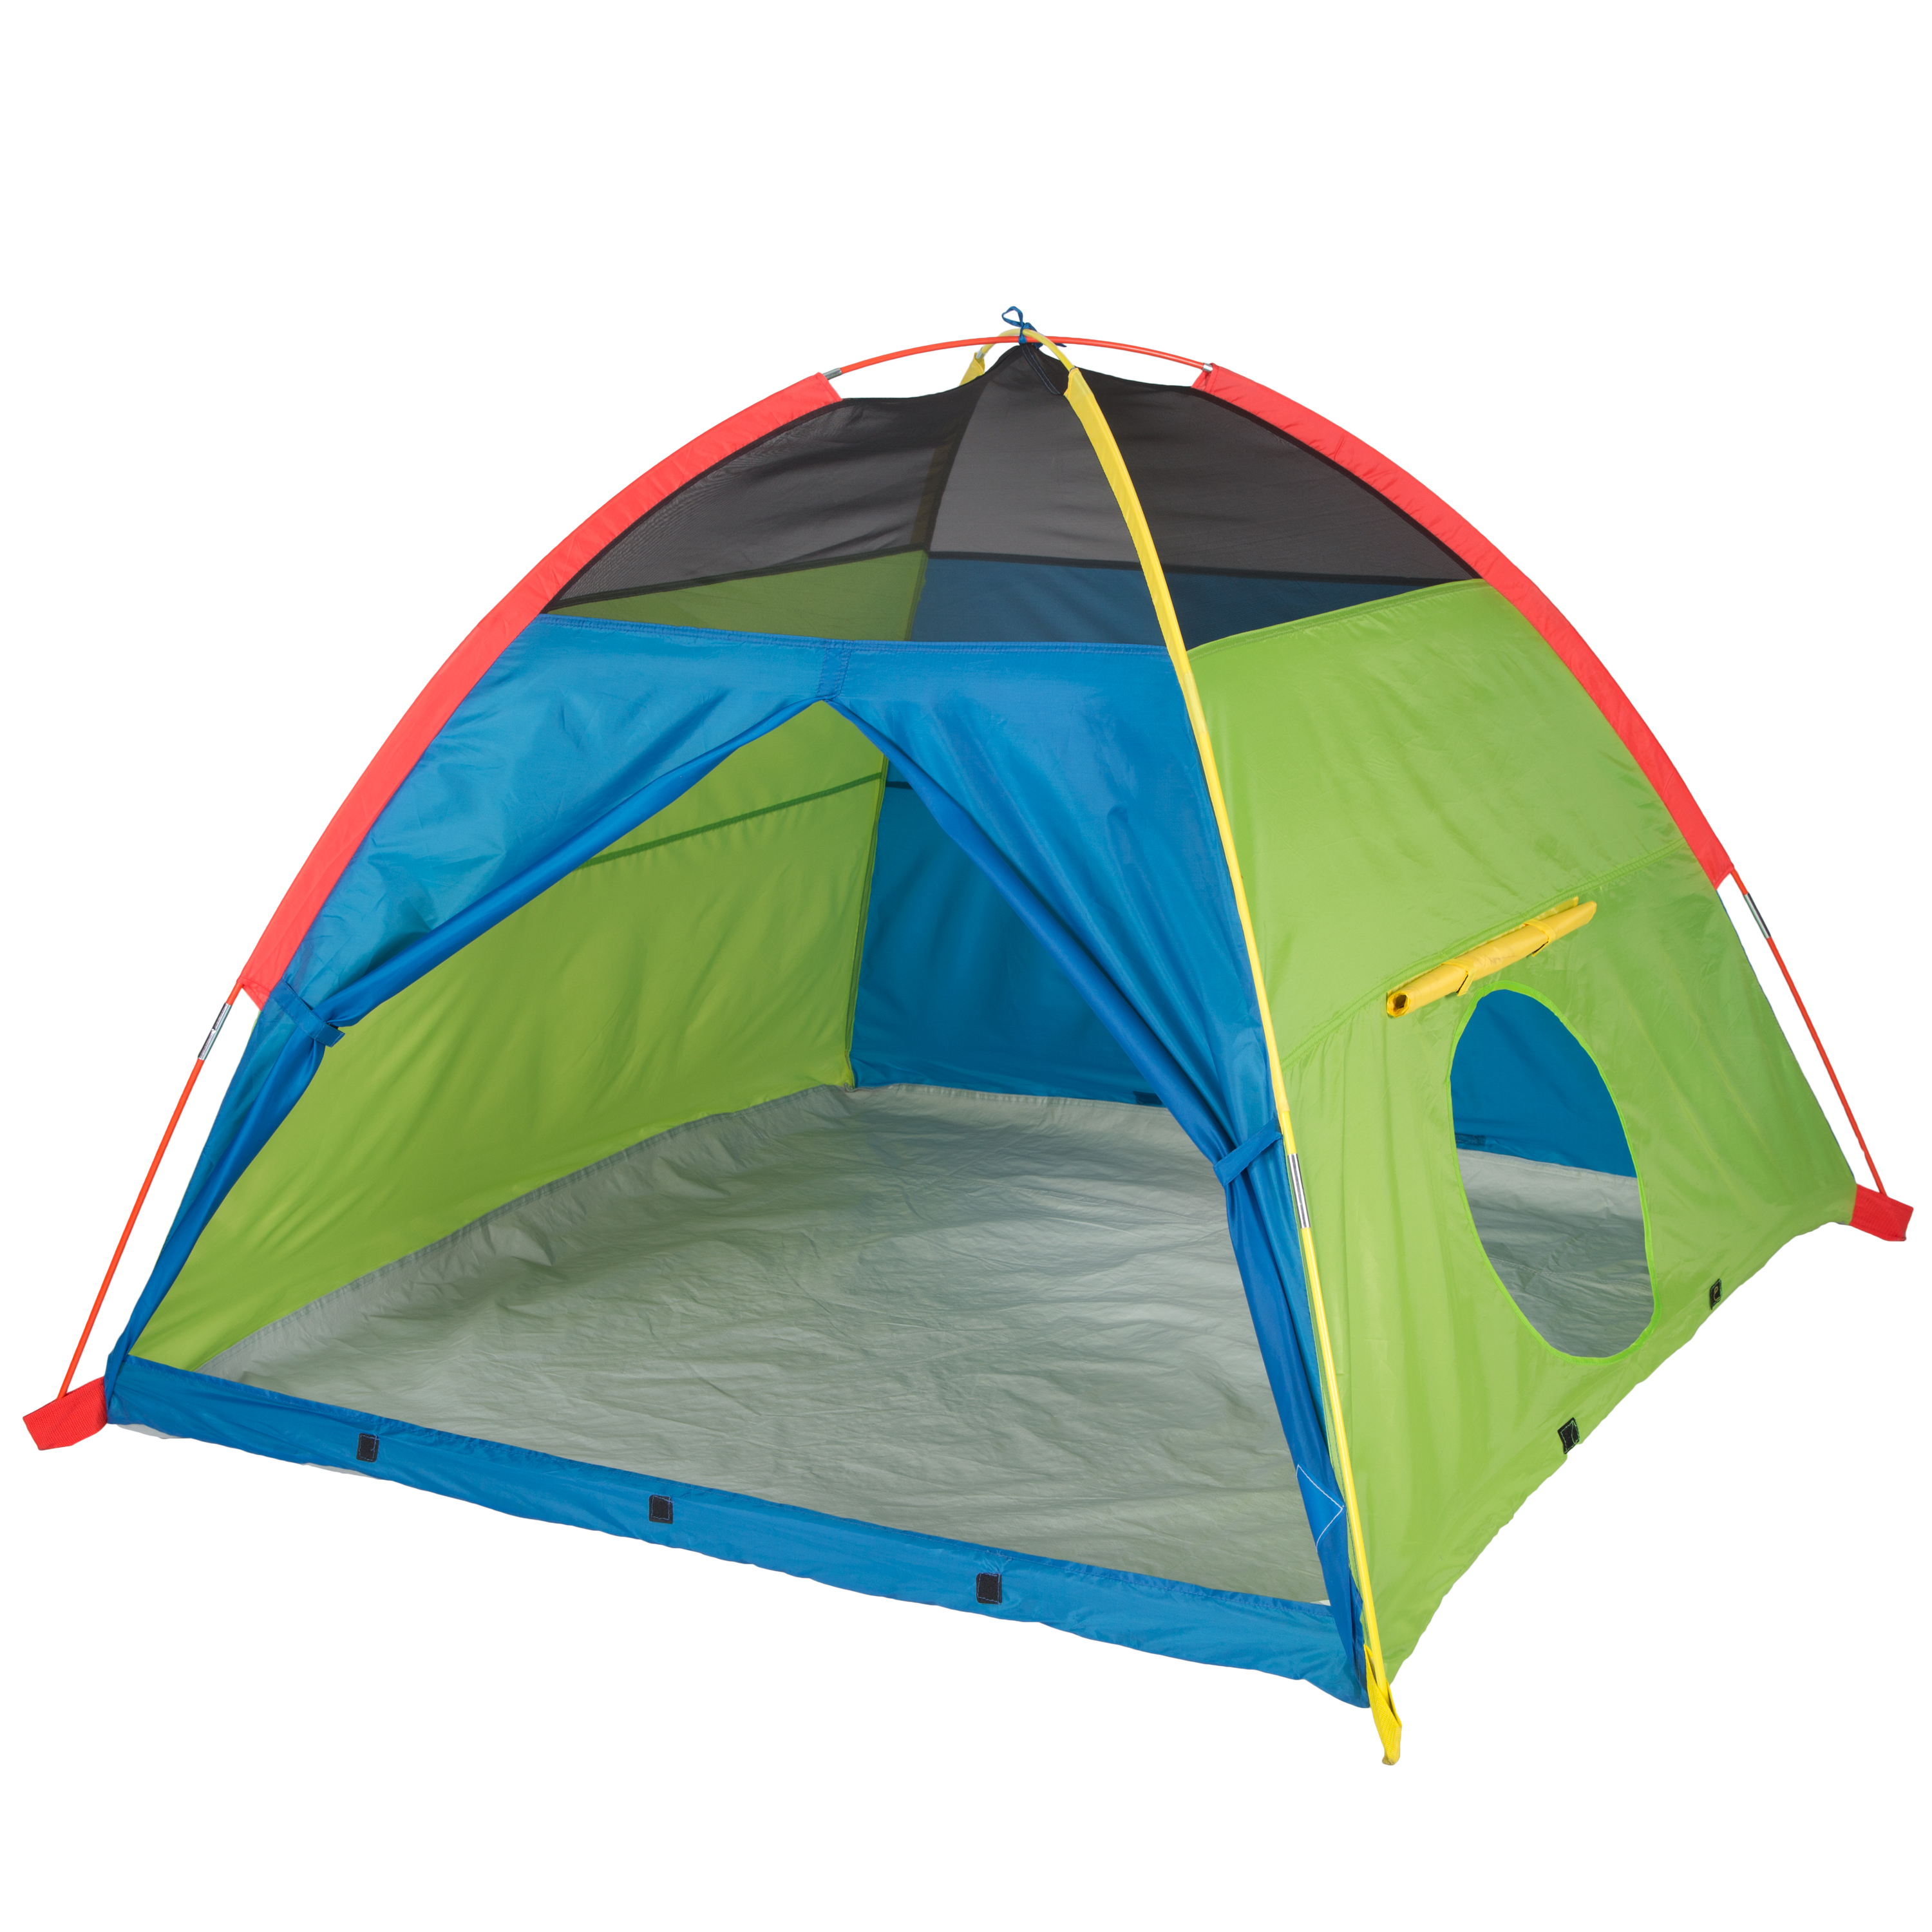 Pacific Play Tents Super Duper 4 Kid Play Tent - image 5 of 21